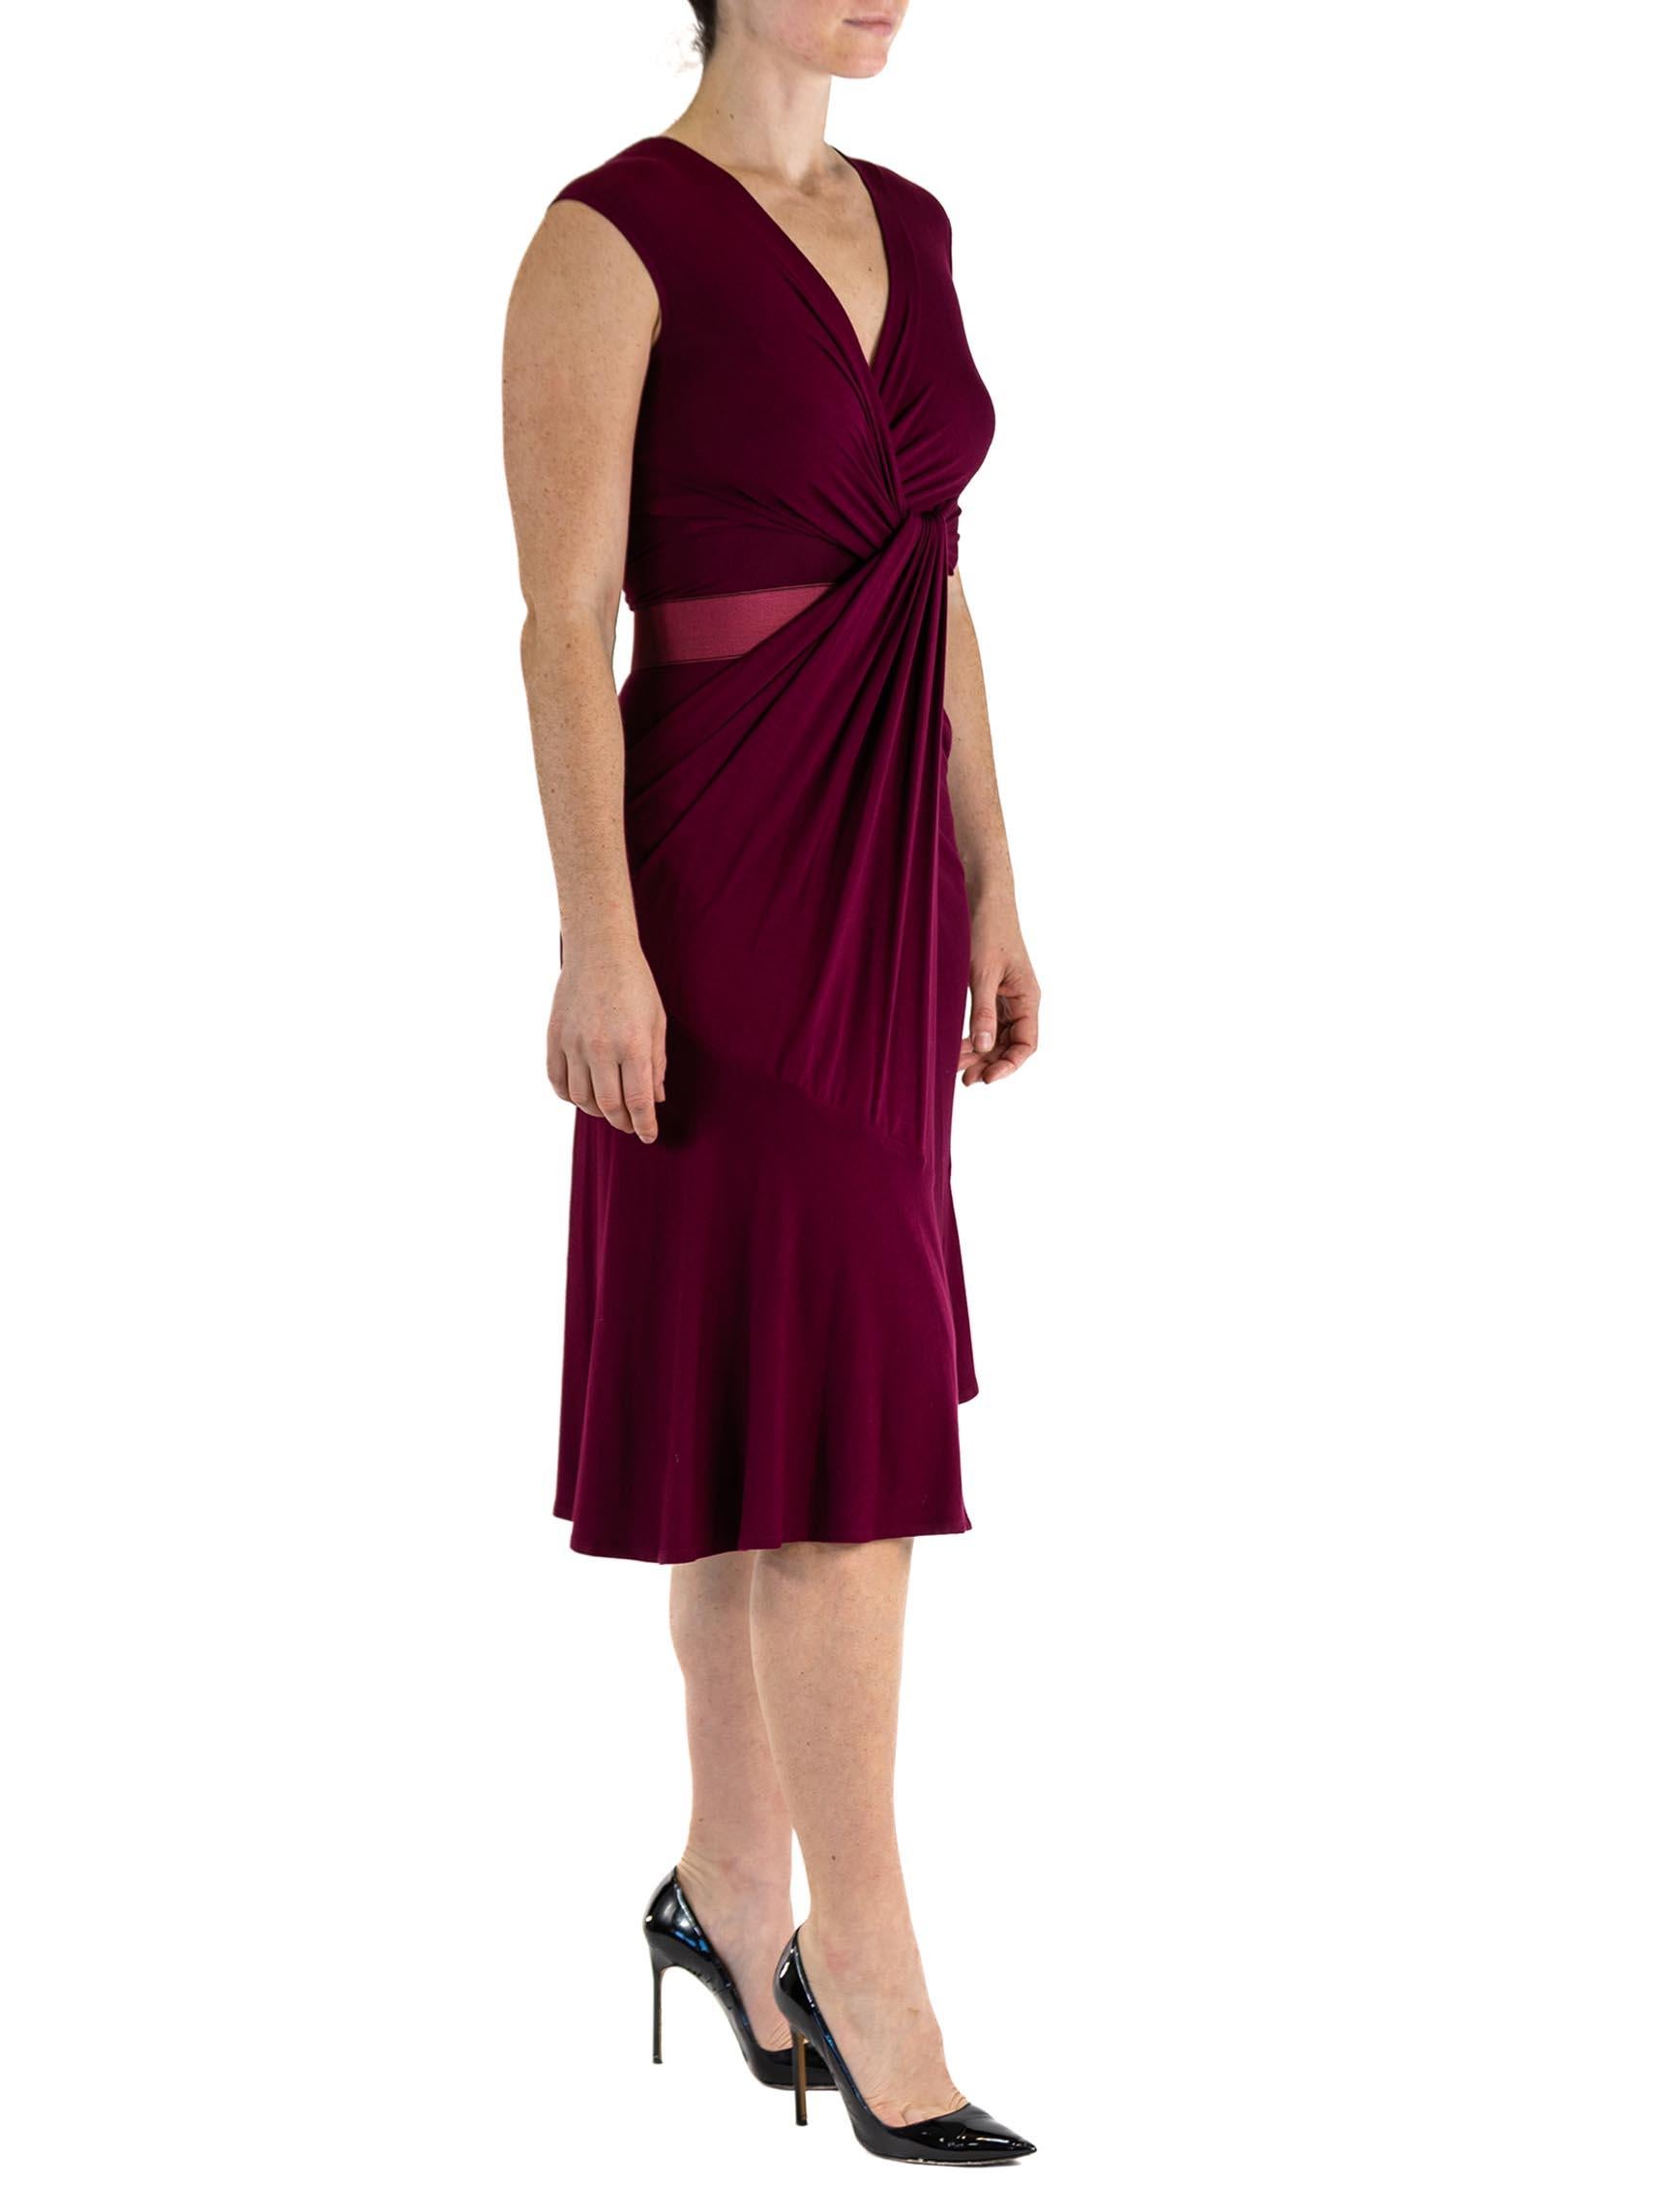 2000S DONNA KARAN Garnet Red Rayon Jersey Knot Front Ruched Dress With Belt For Sale 4